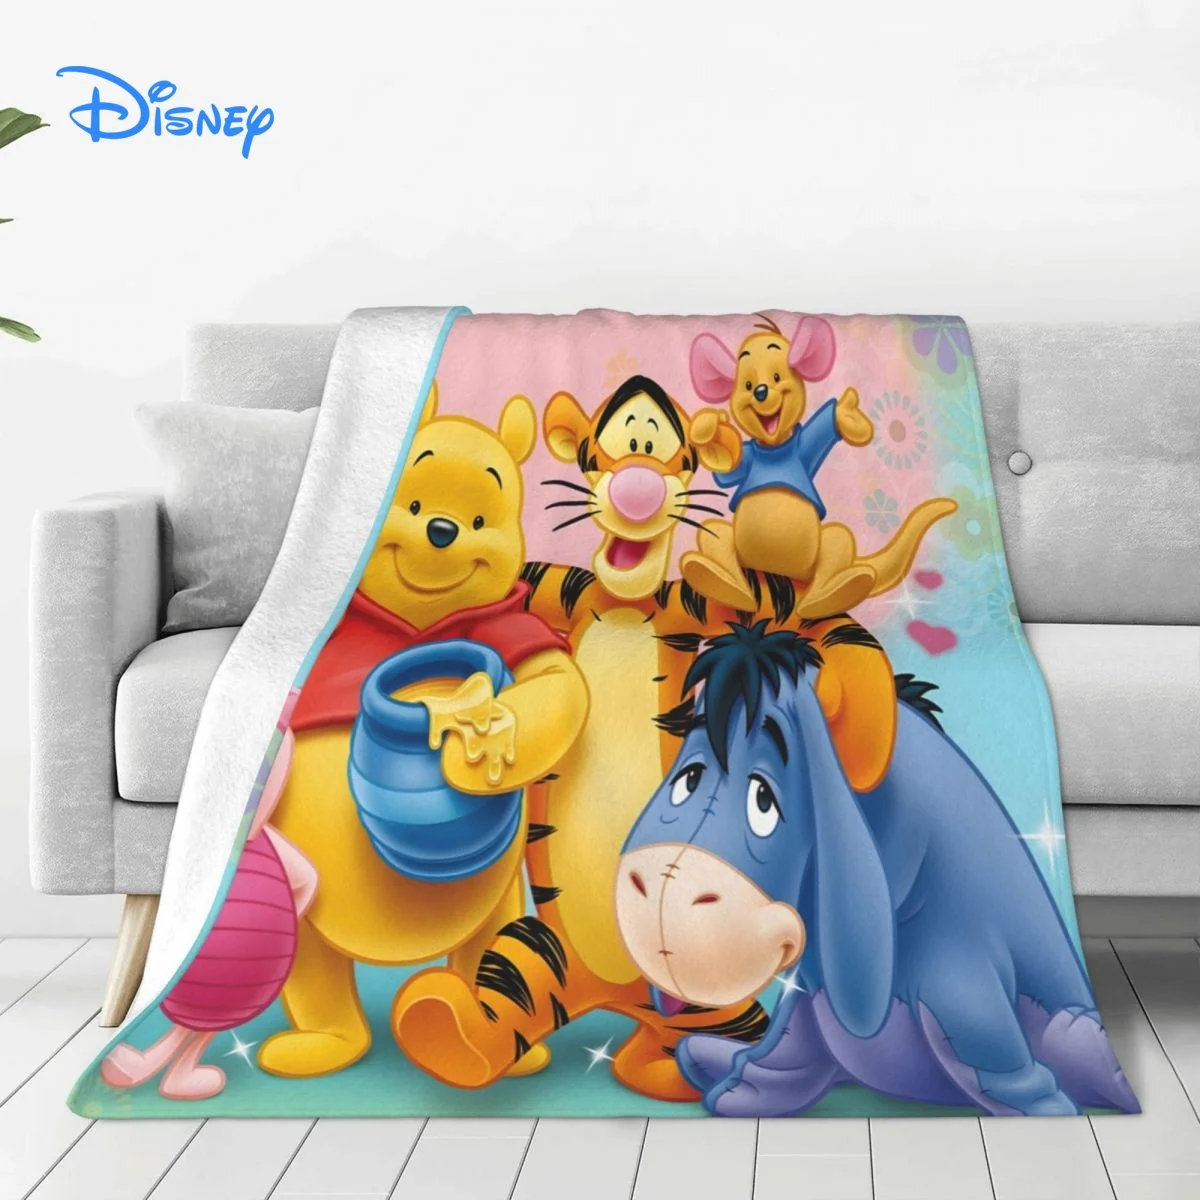 

Disney Winnie the Pooh Throw Blankets On Bed Sofa Air Condition Sleeping Cover Bedding Throws Bedsheet For Kids